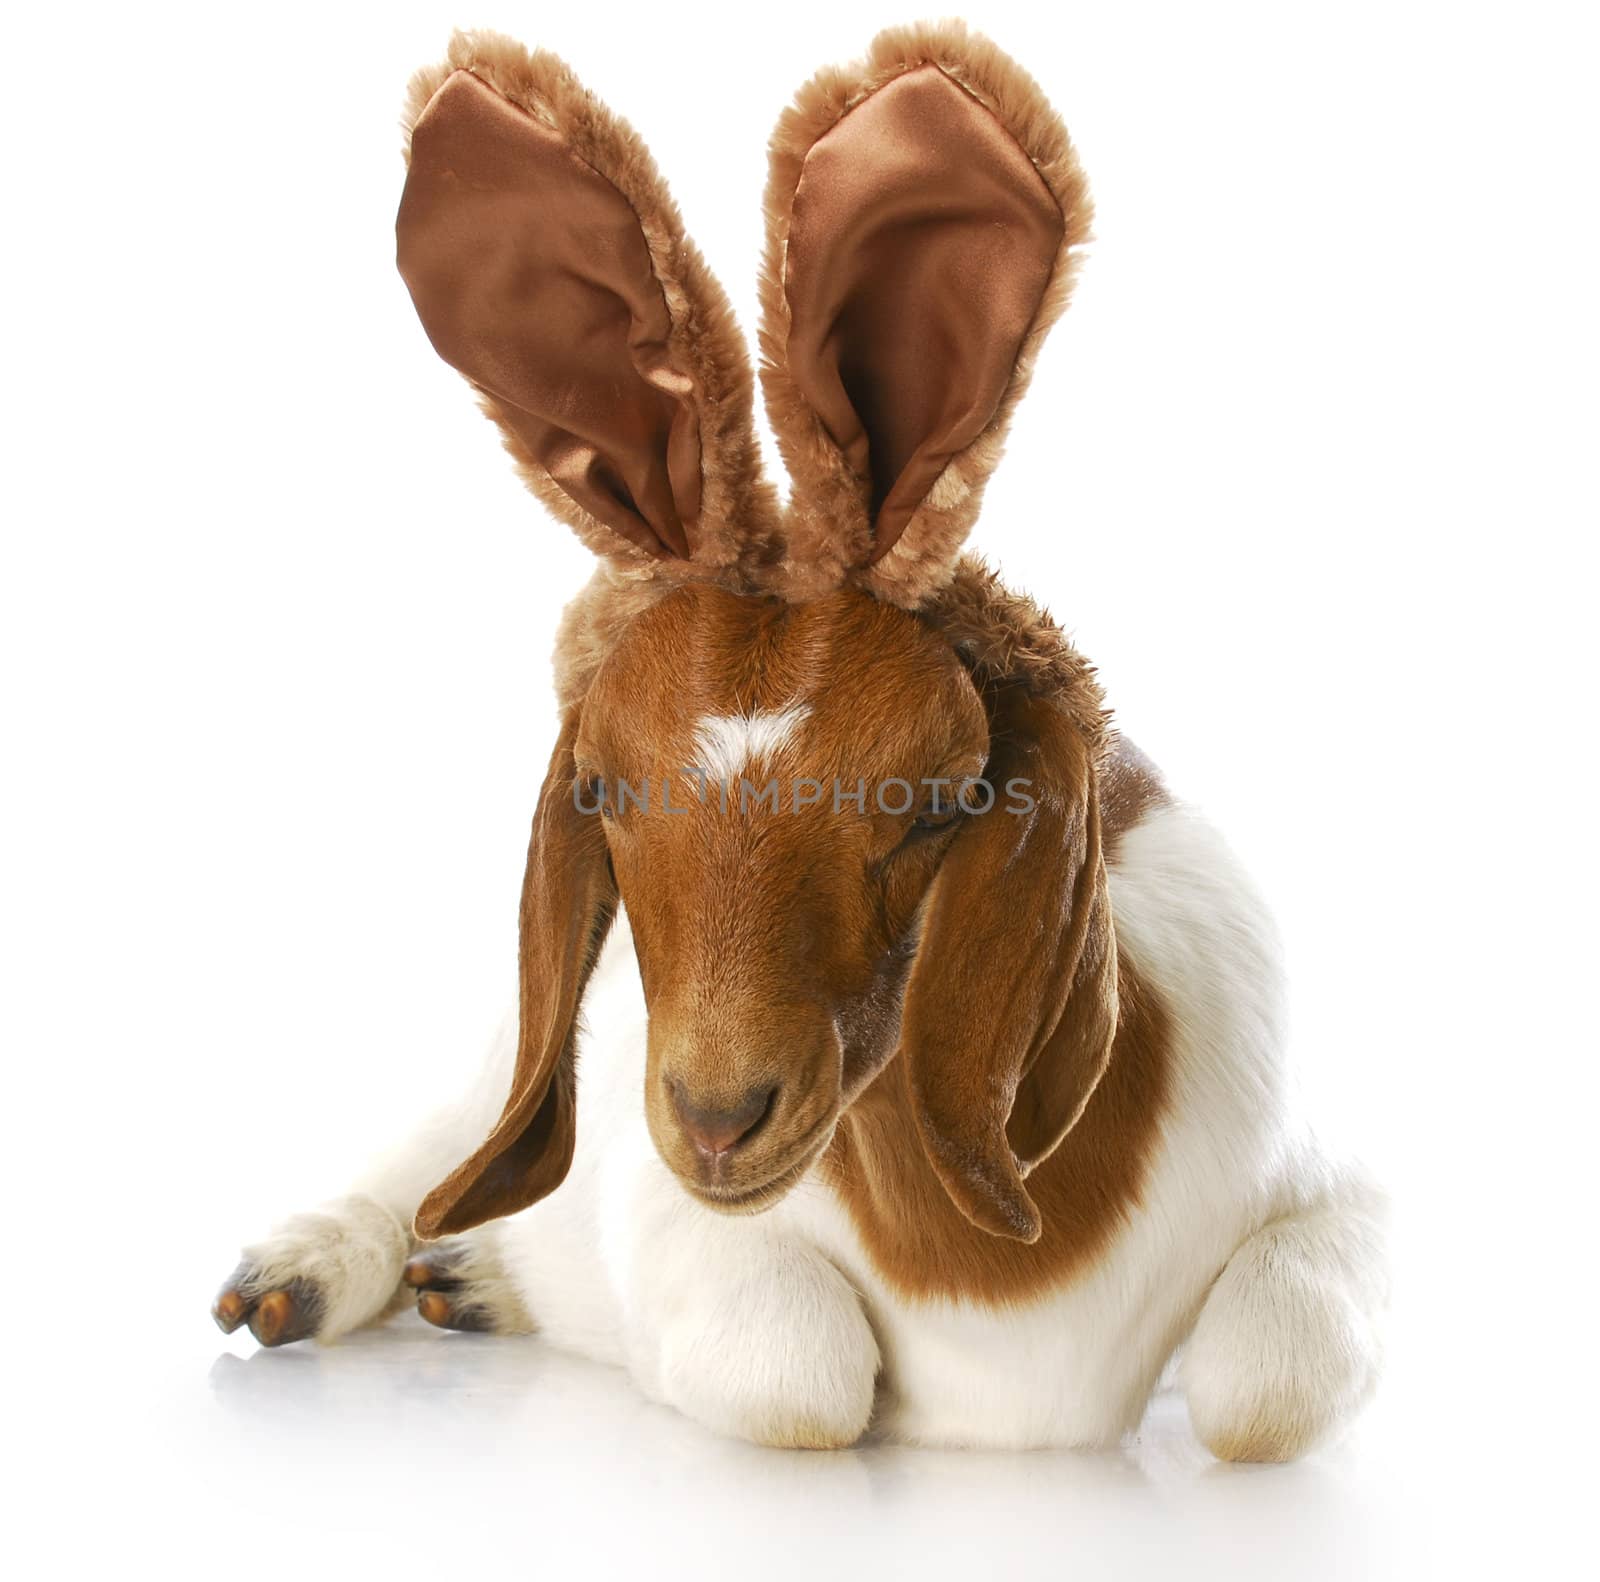 goat wearing bunny ears with reflection on white background